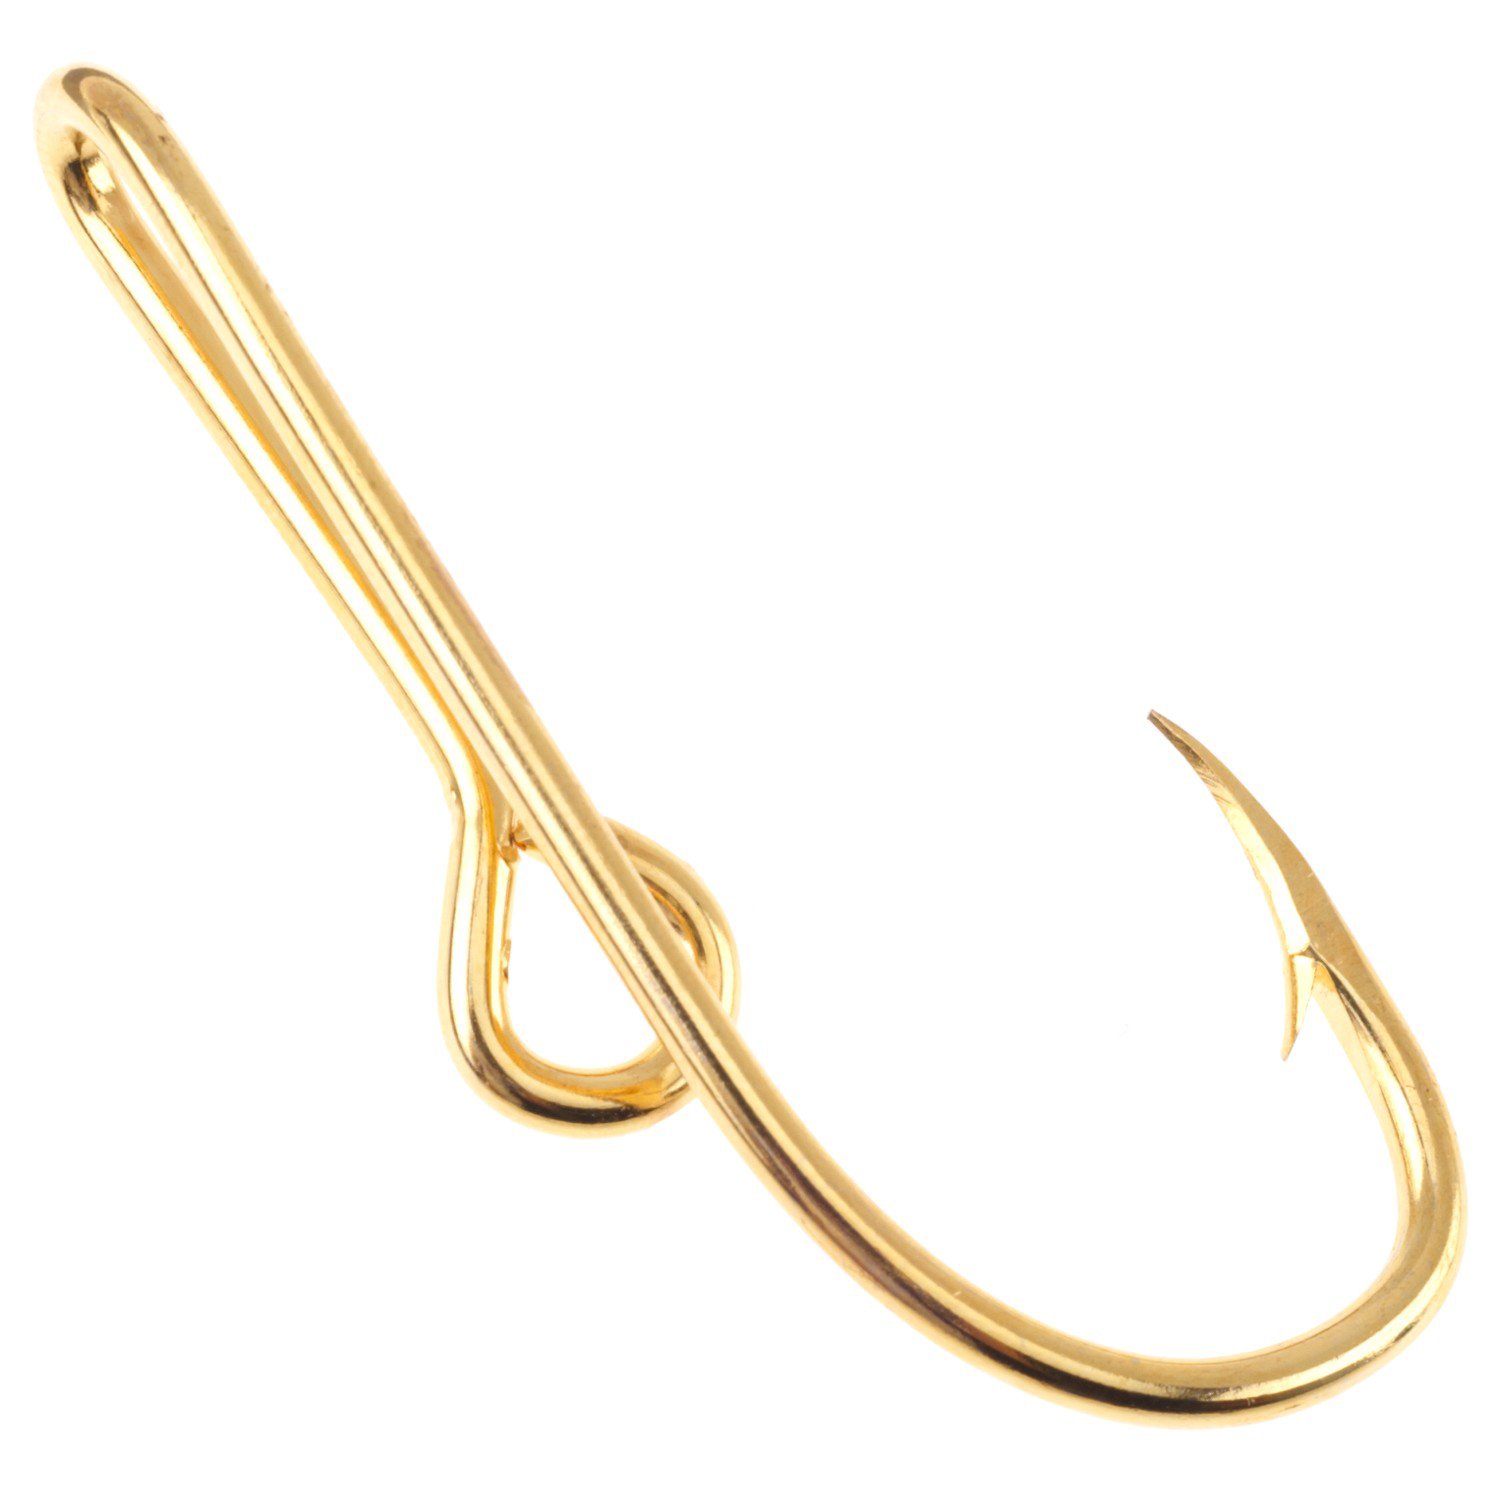  Eagle Claw Hat Fish Hook Set of Two Hat Hooks One